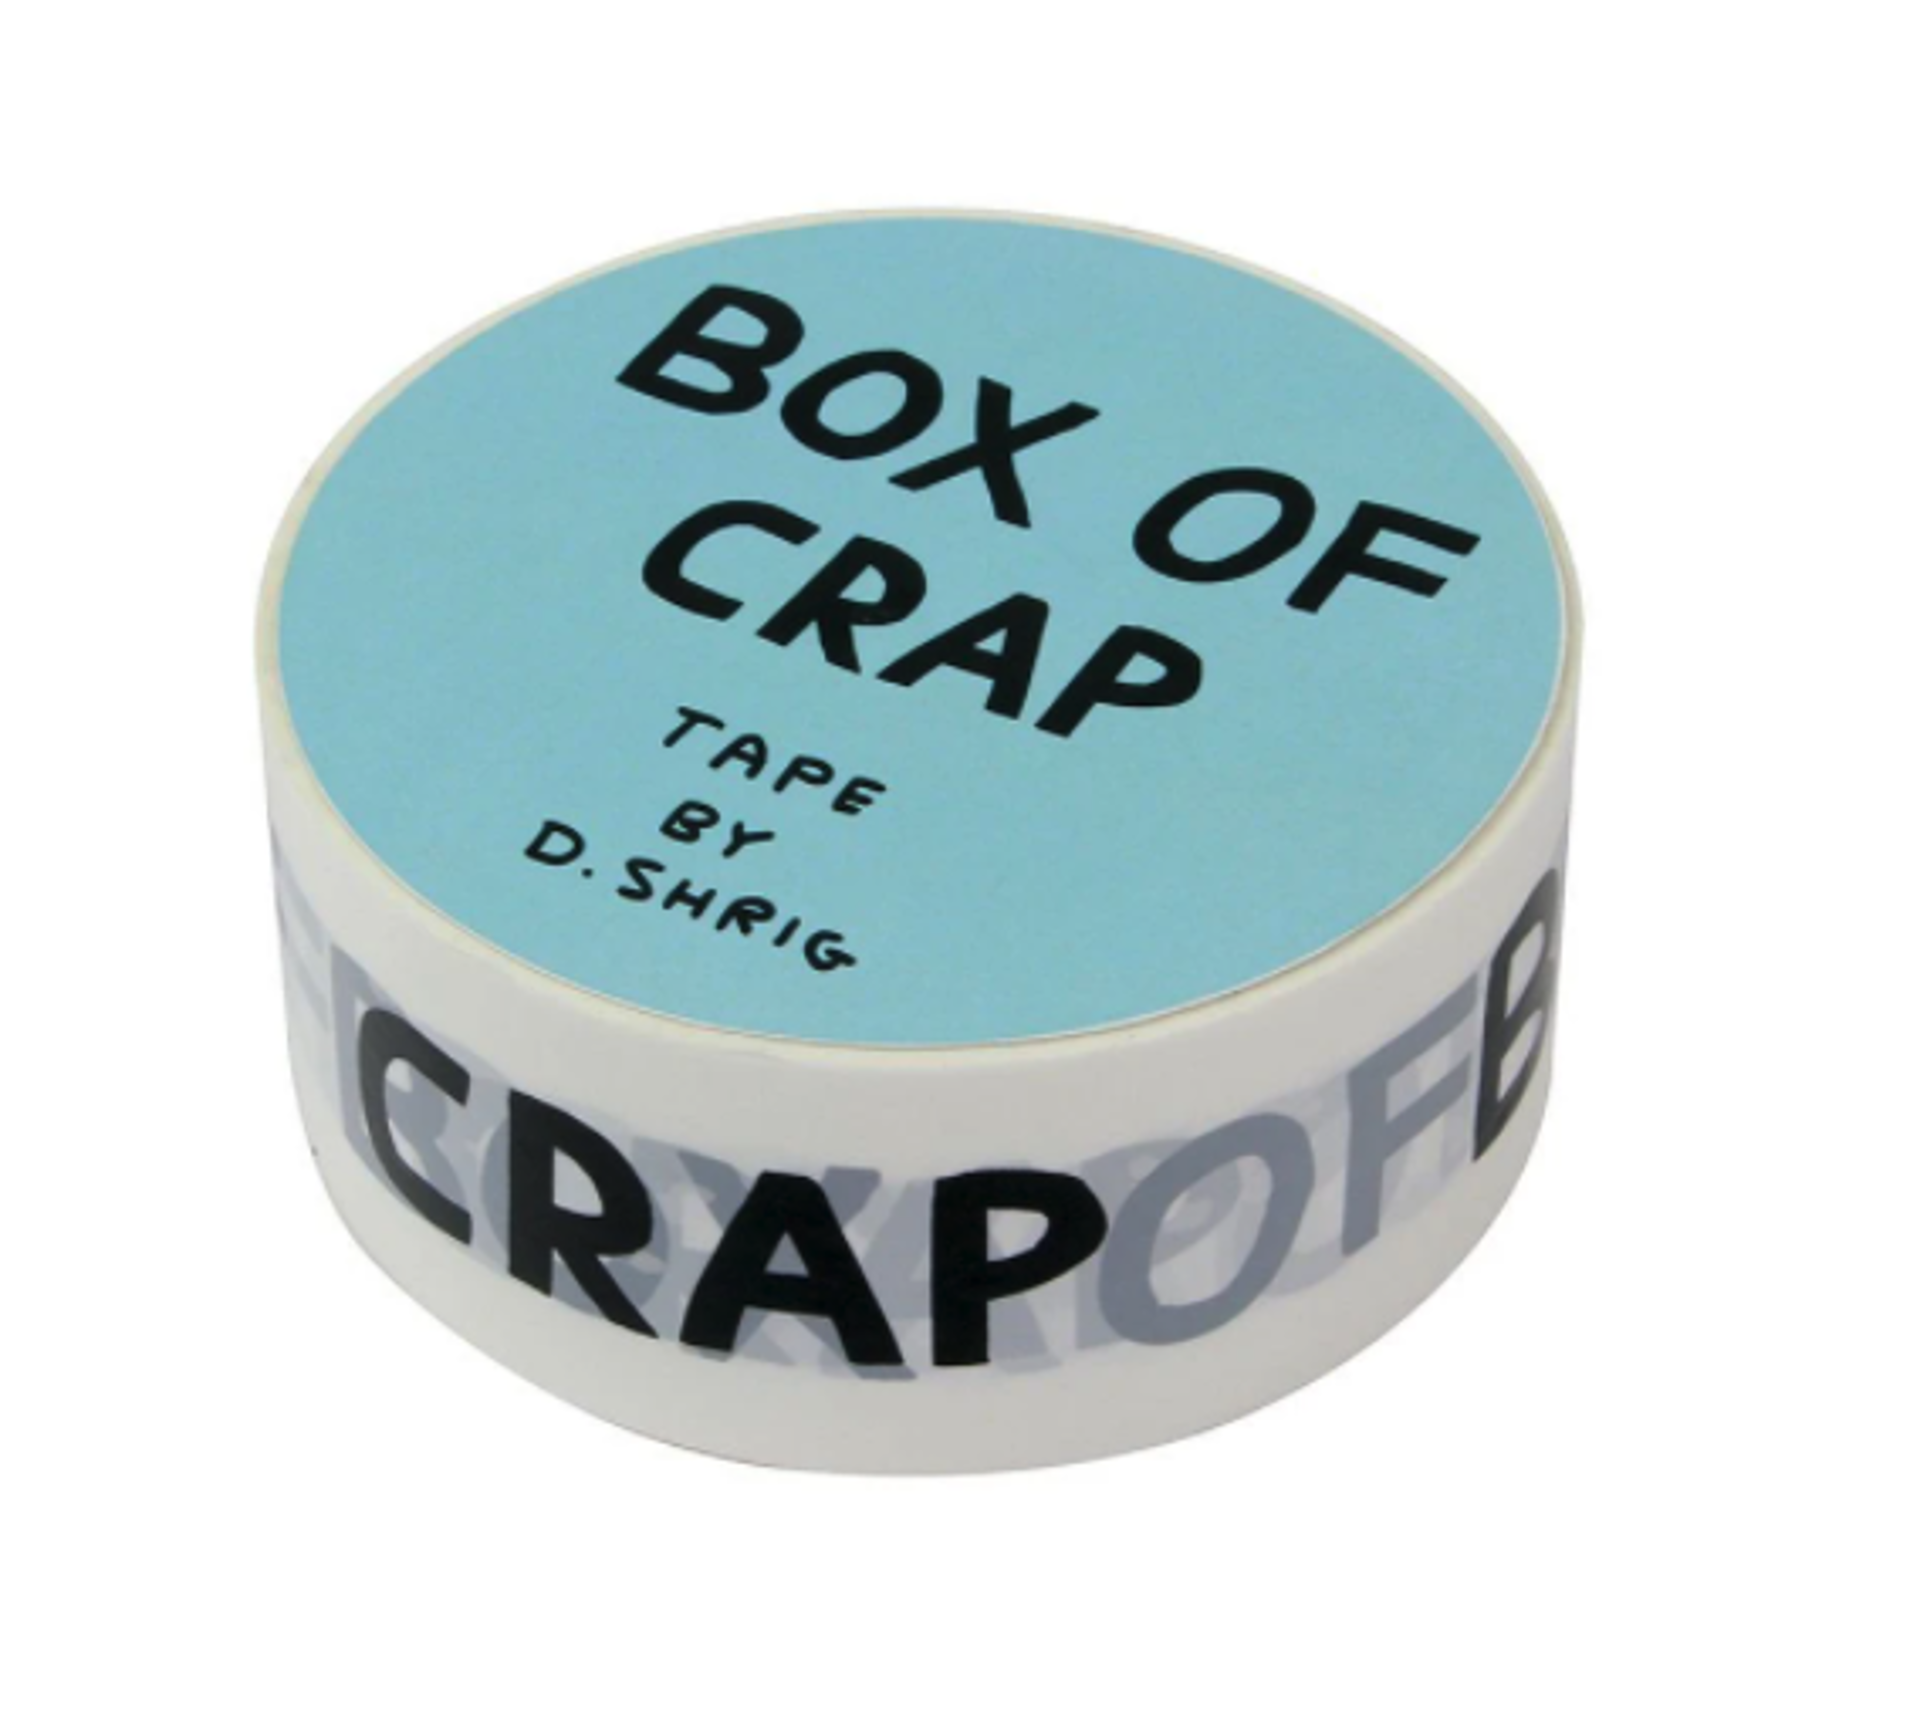 Box of Crap Packing Tape by David Shrigley